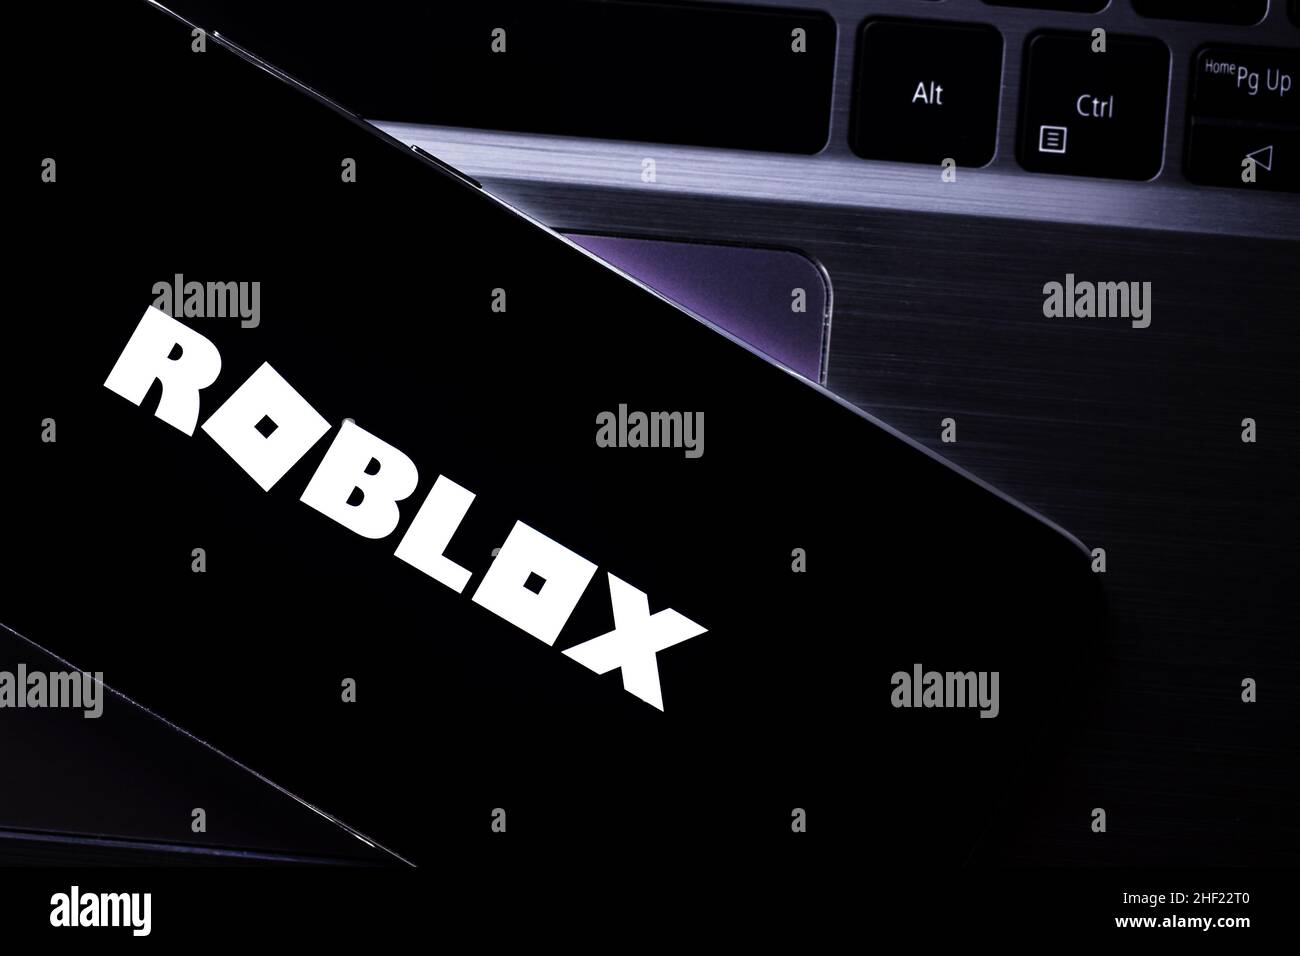 Roblox editorial. Illustrative photo for news about Roblox - an